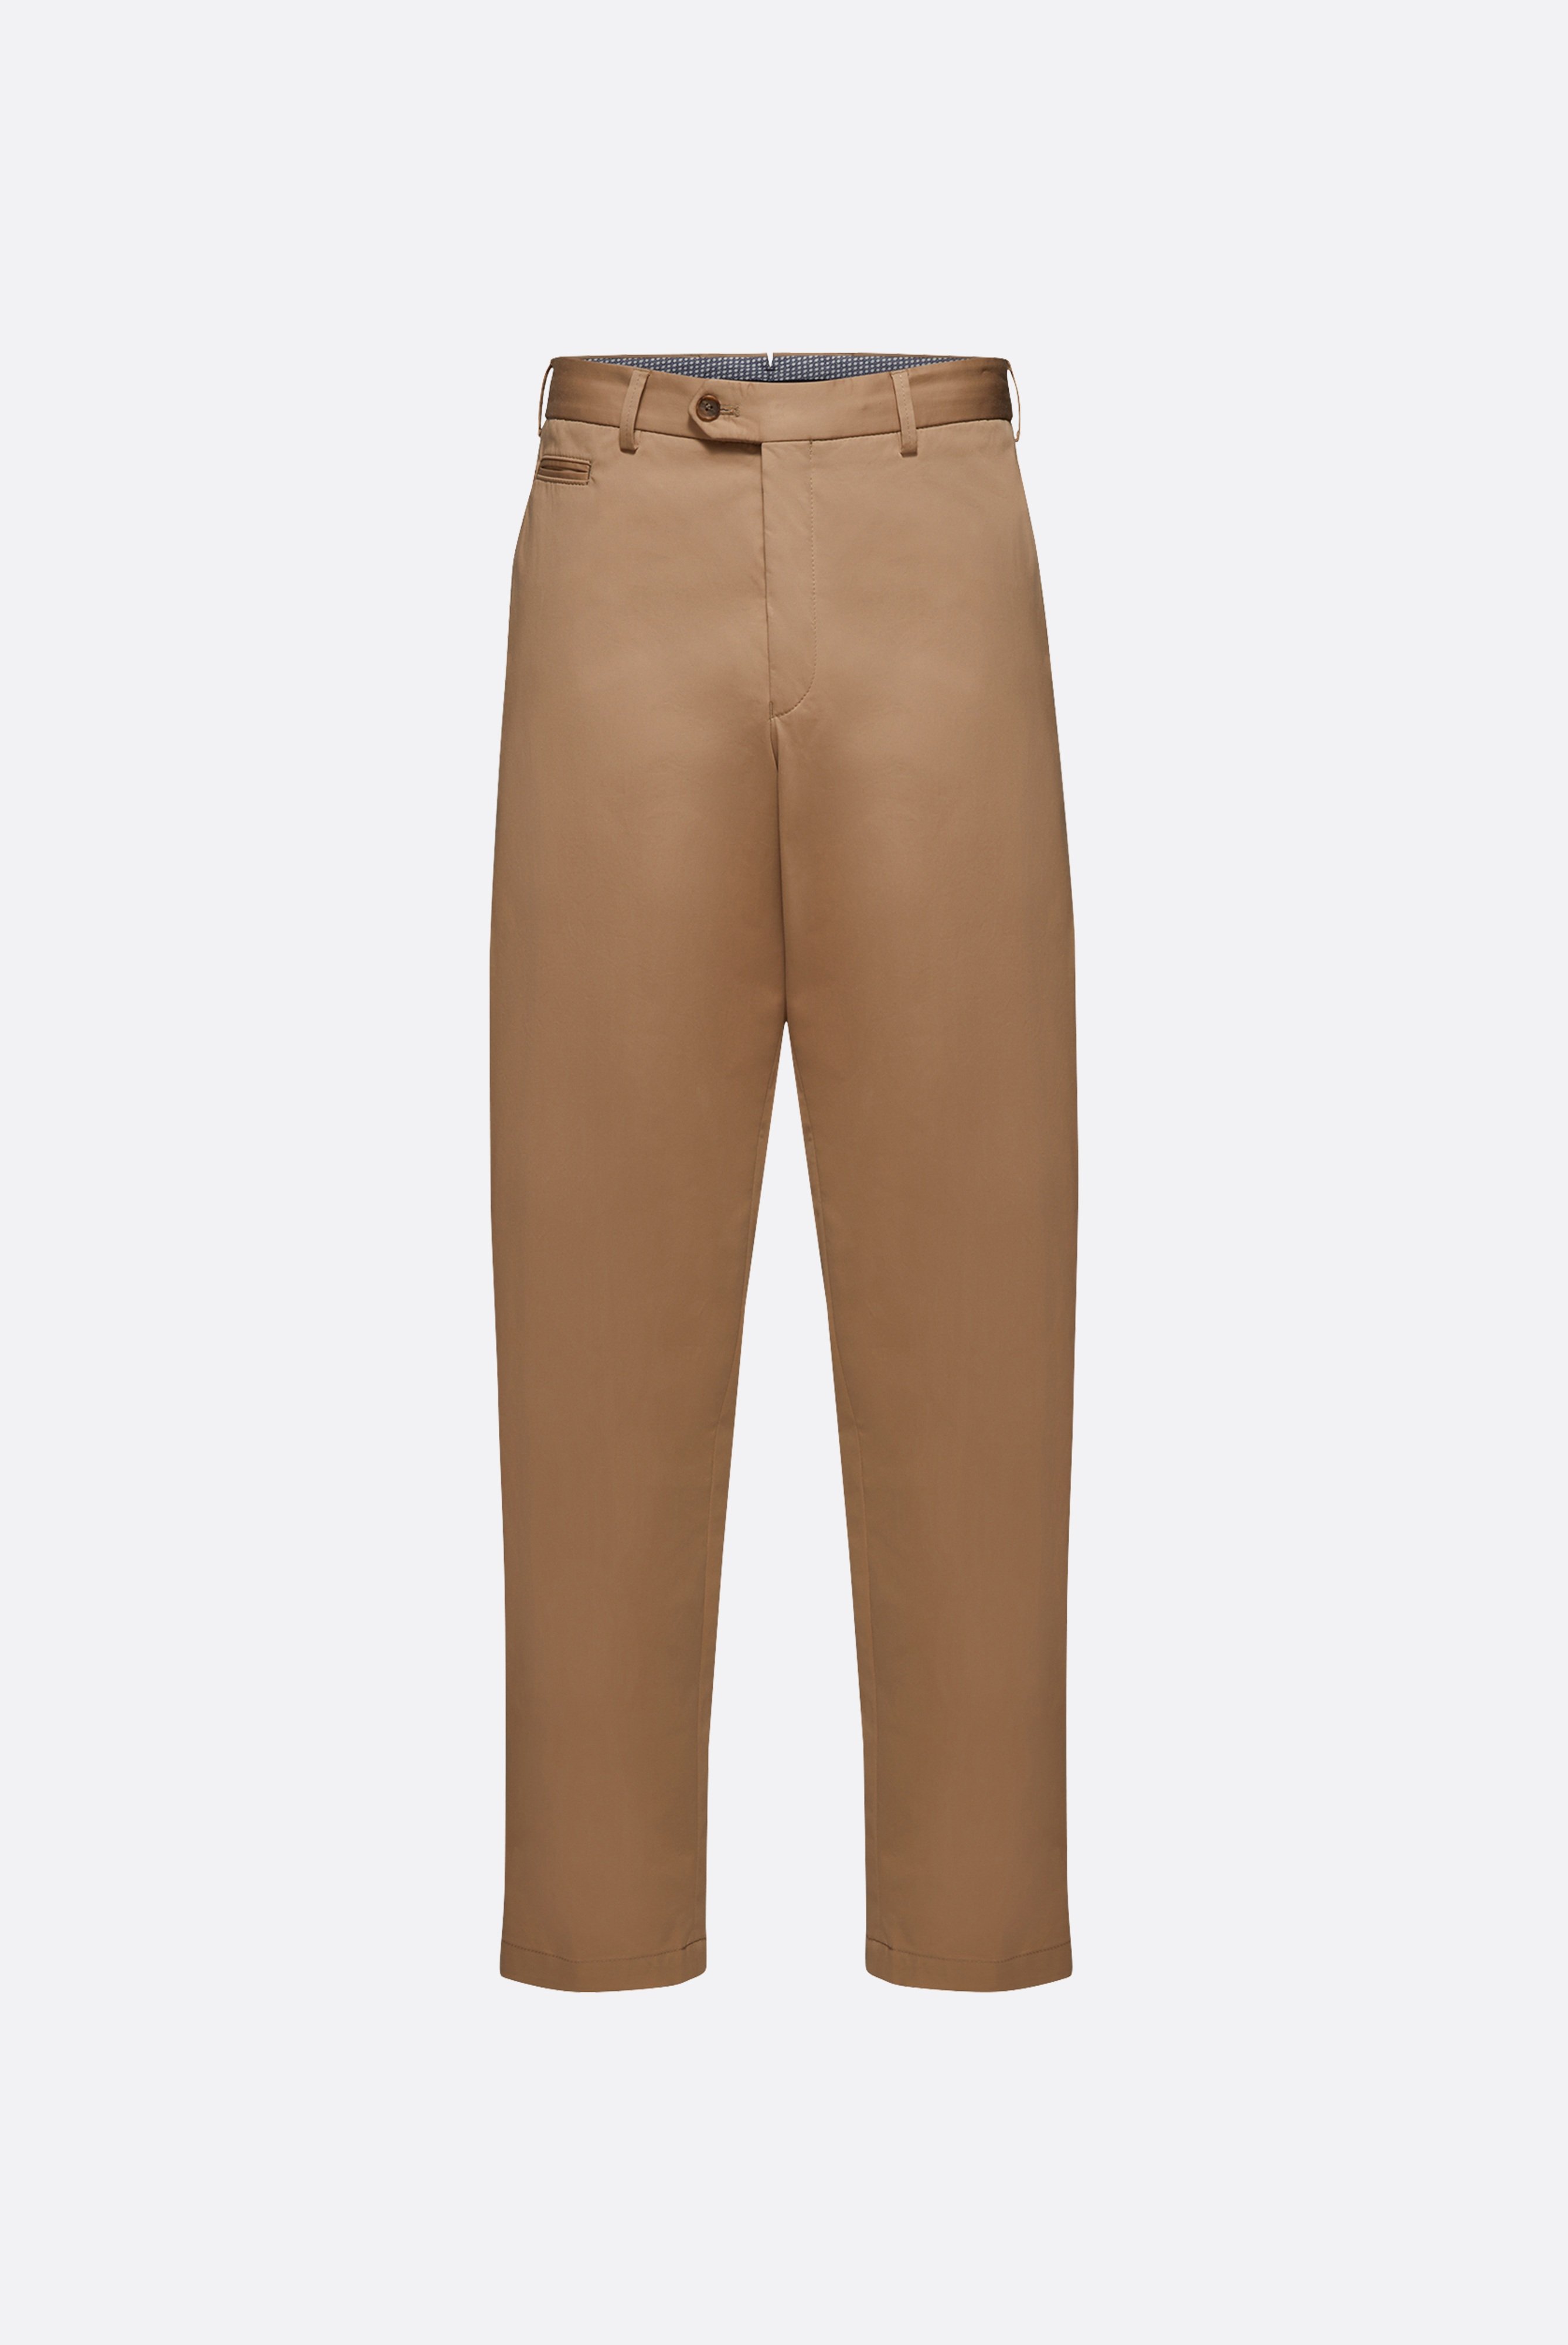 Jeans & Trousers+Straight-Leg Chinos with Stretch+80.7844..J00151.140.48